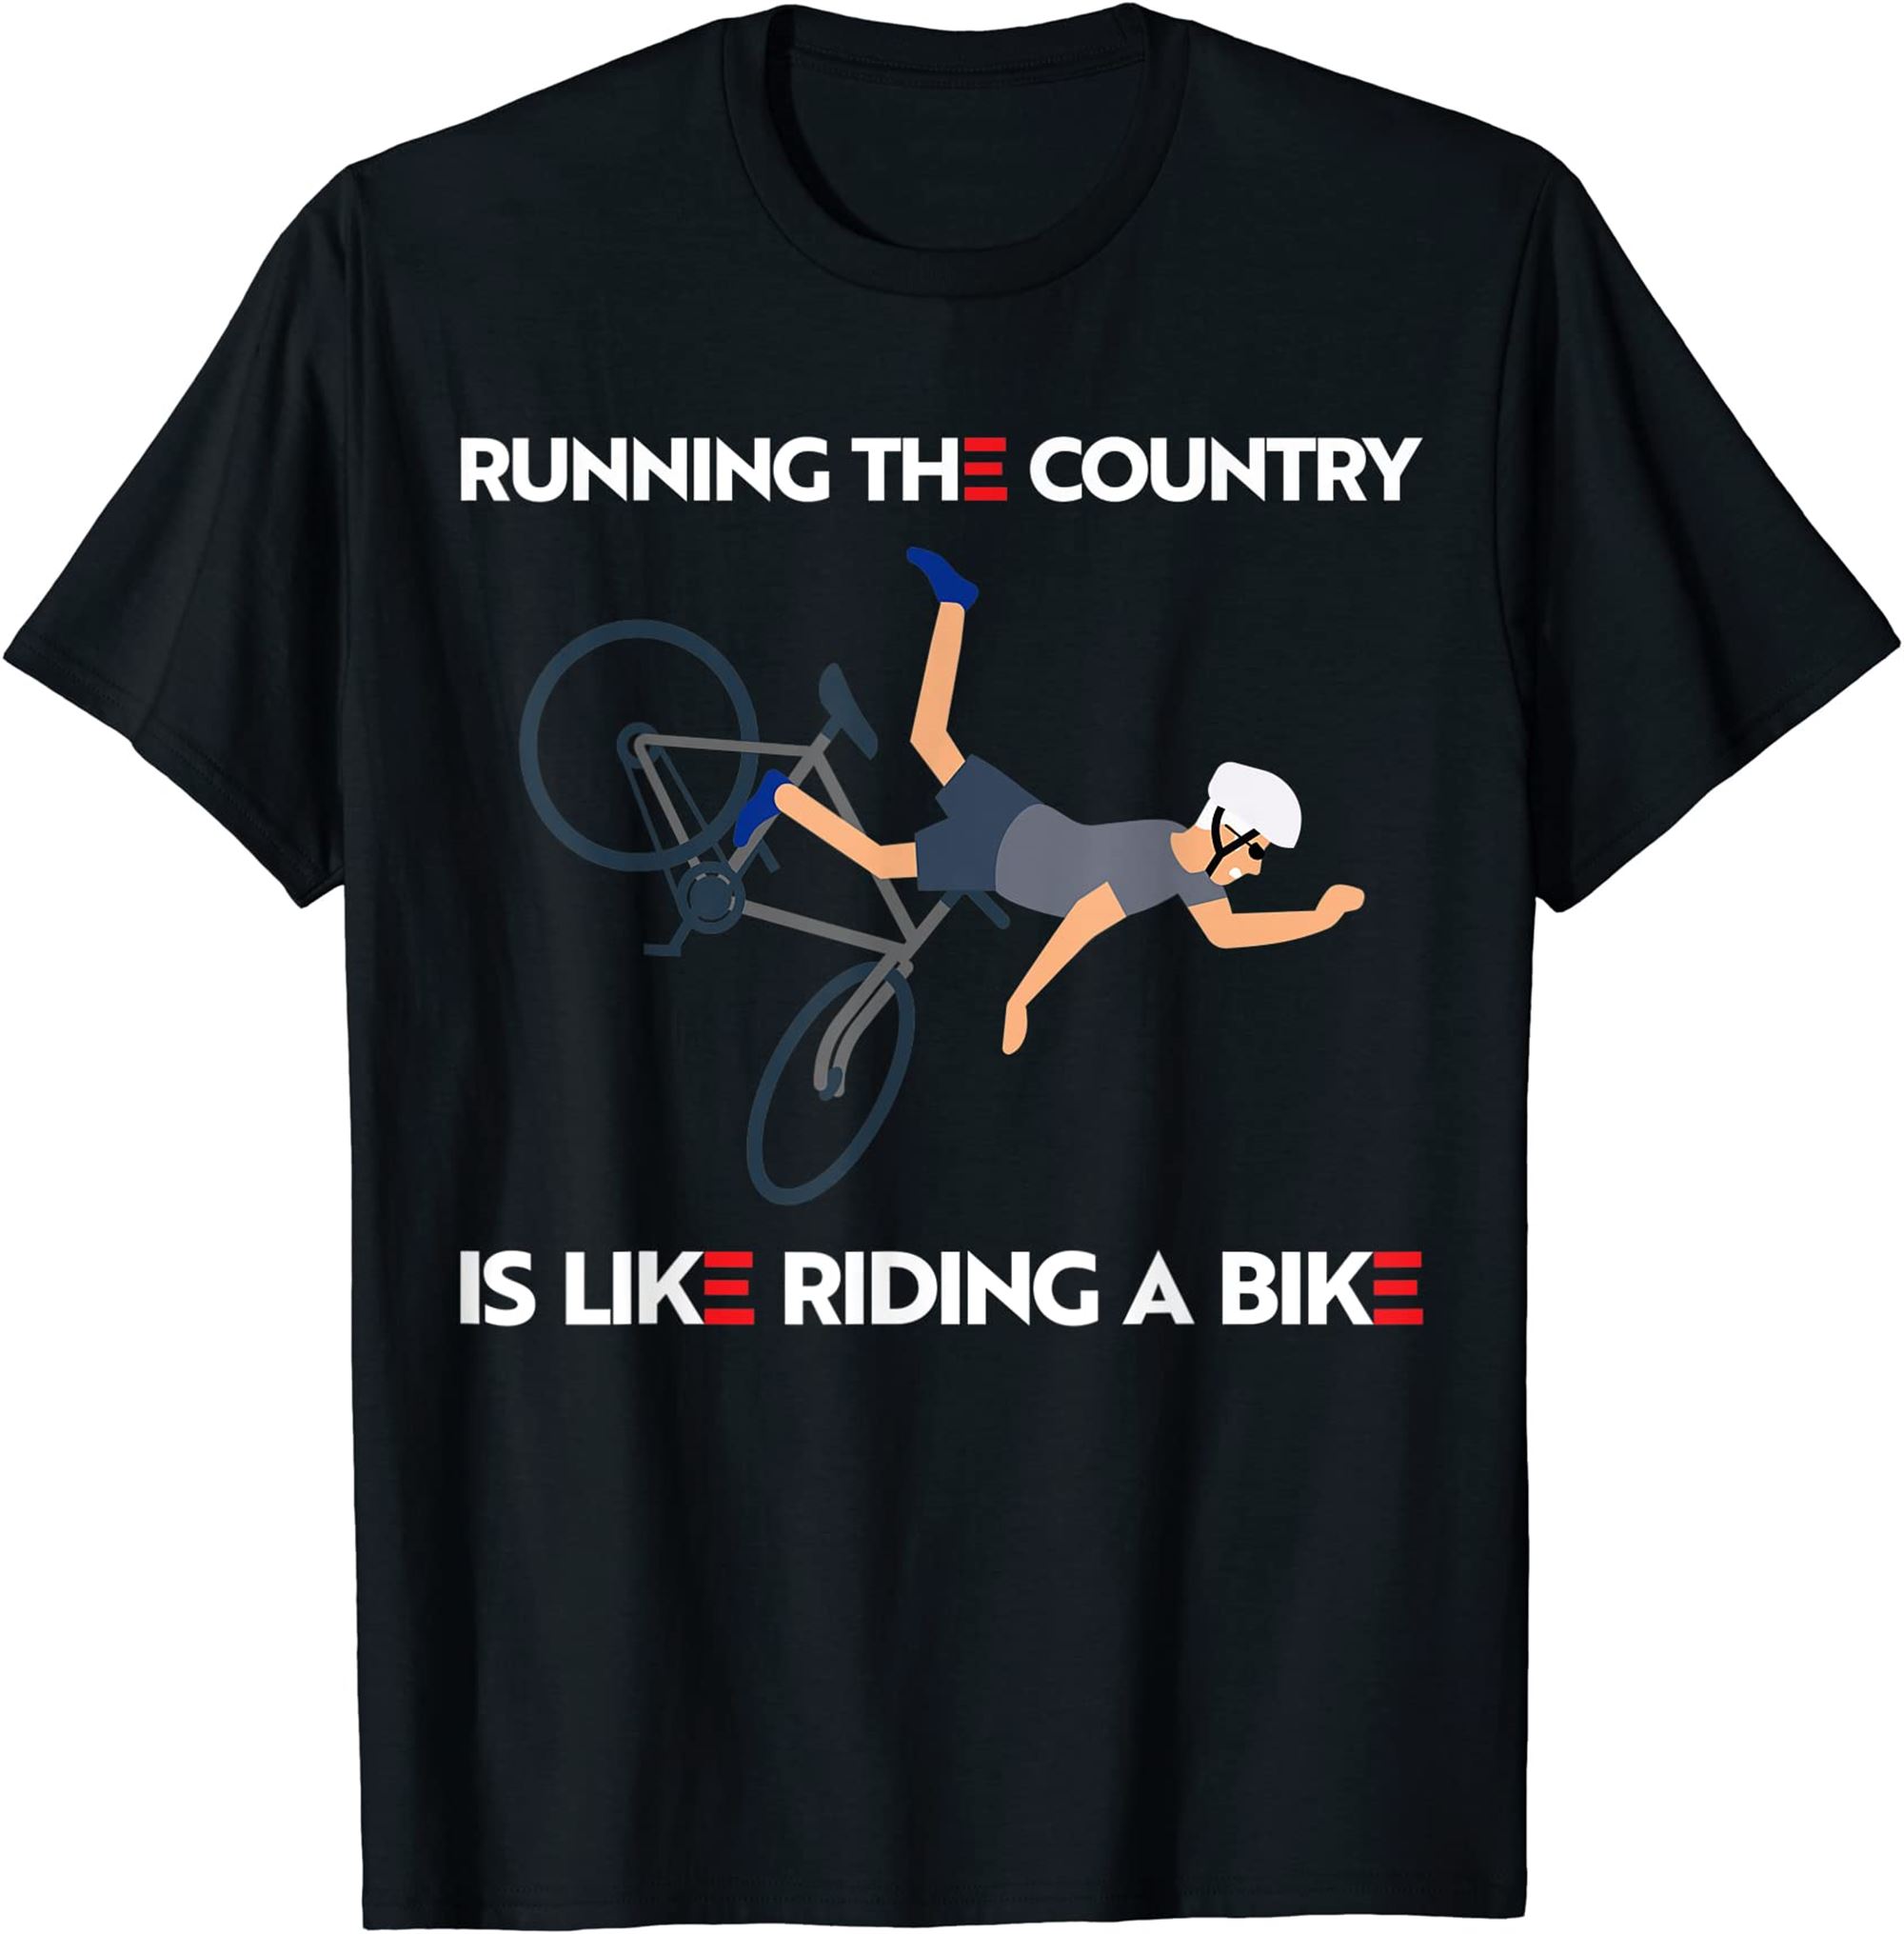 Running The Country Is Like Riding A Bike Funny T-shirt Full Size Up To 5xl